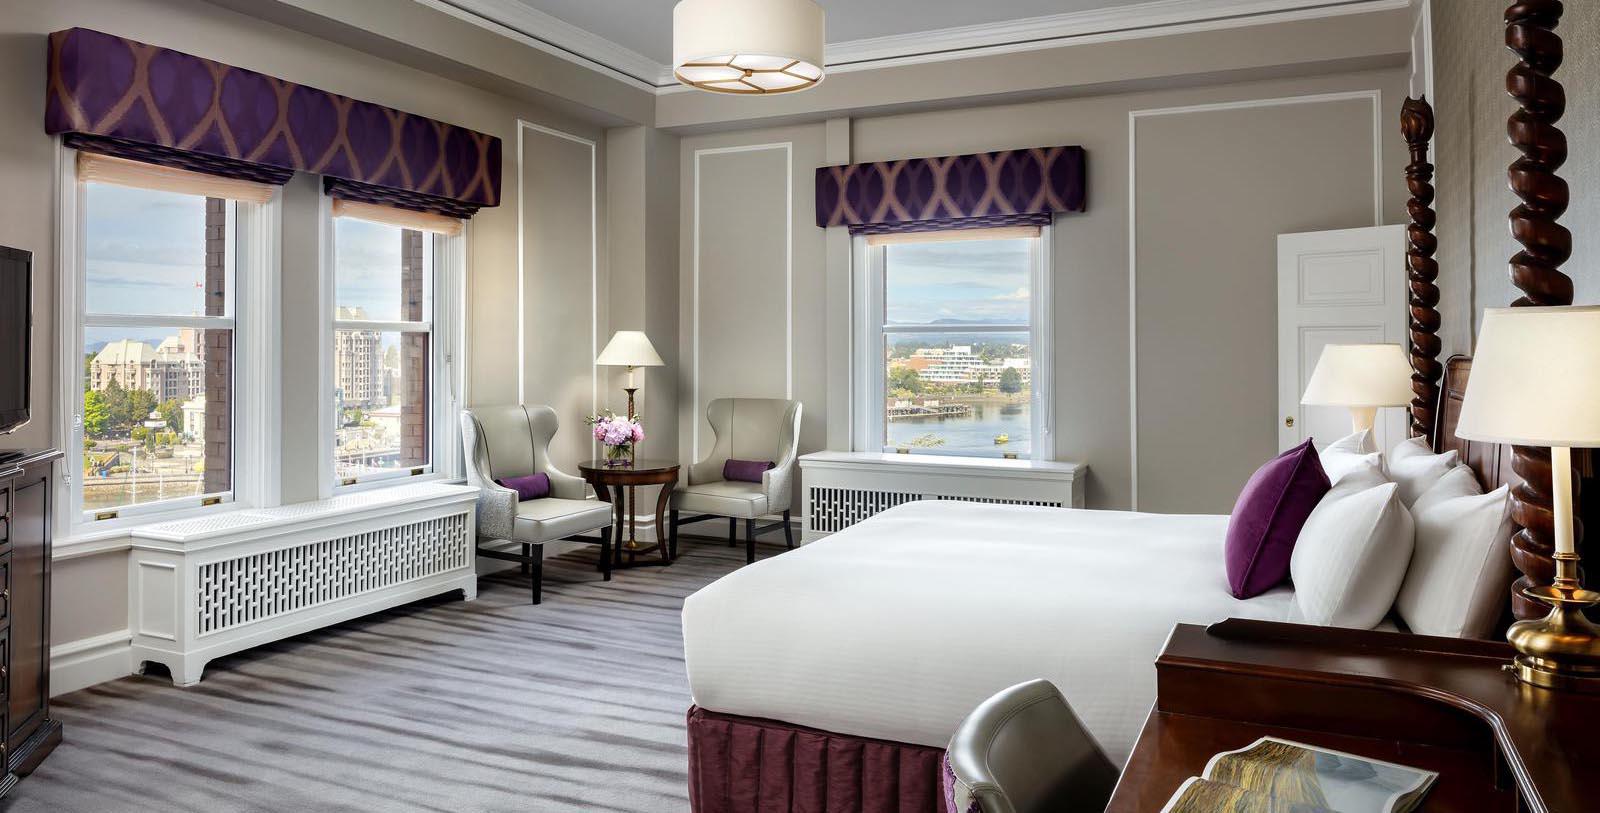 Image of guestroom Fairmont Empress, 1908, Member of Historic Hotels Worldwide, in Victoria, British Columbia, Canada, Accommodations